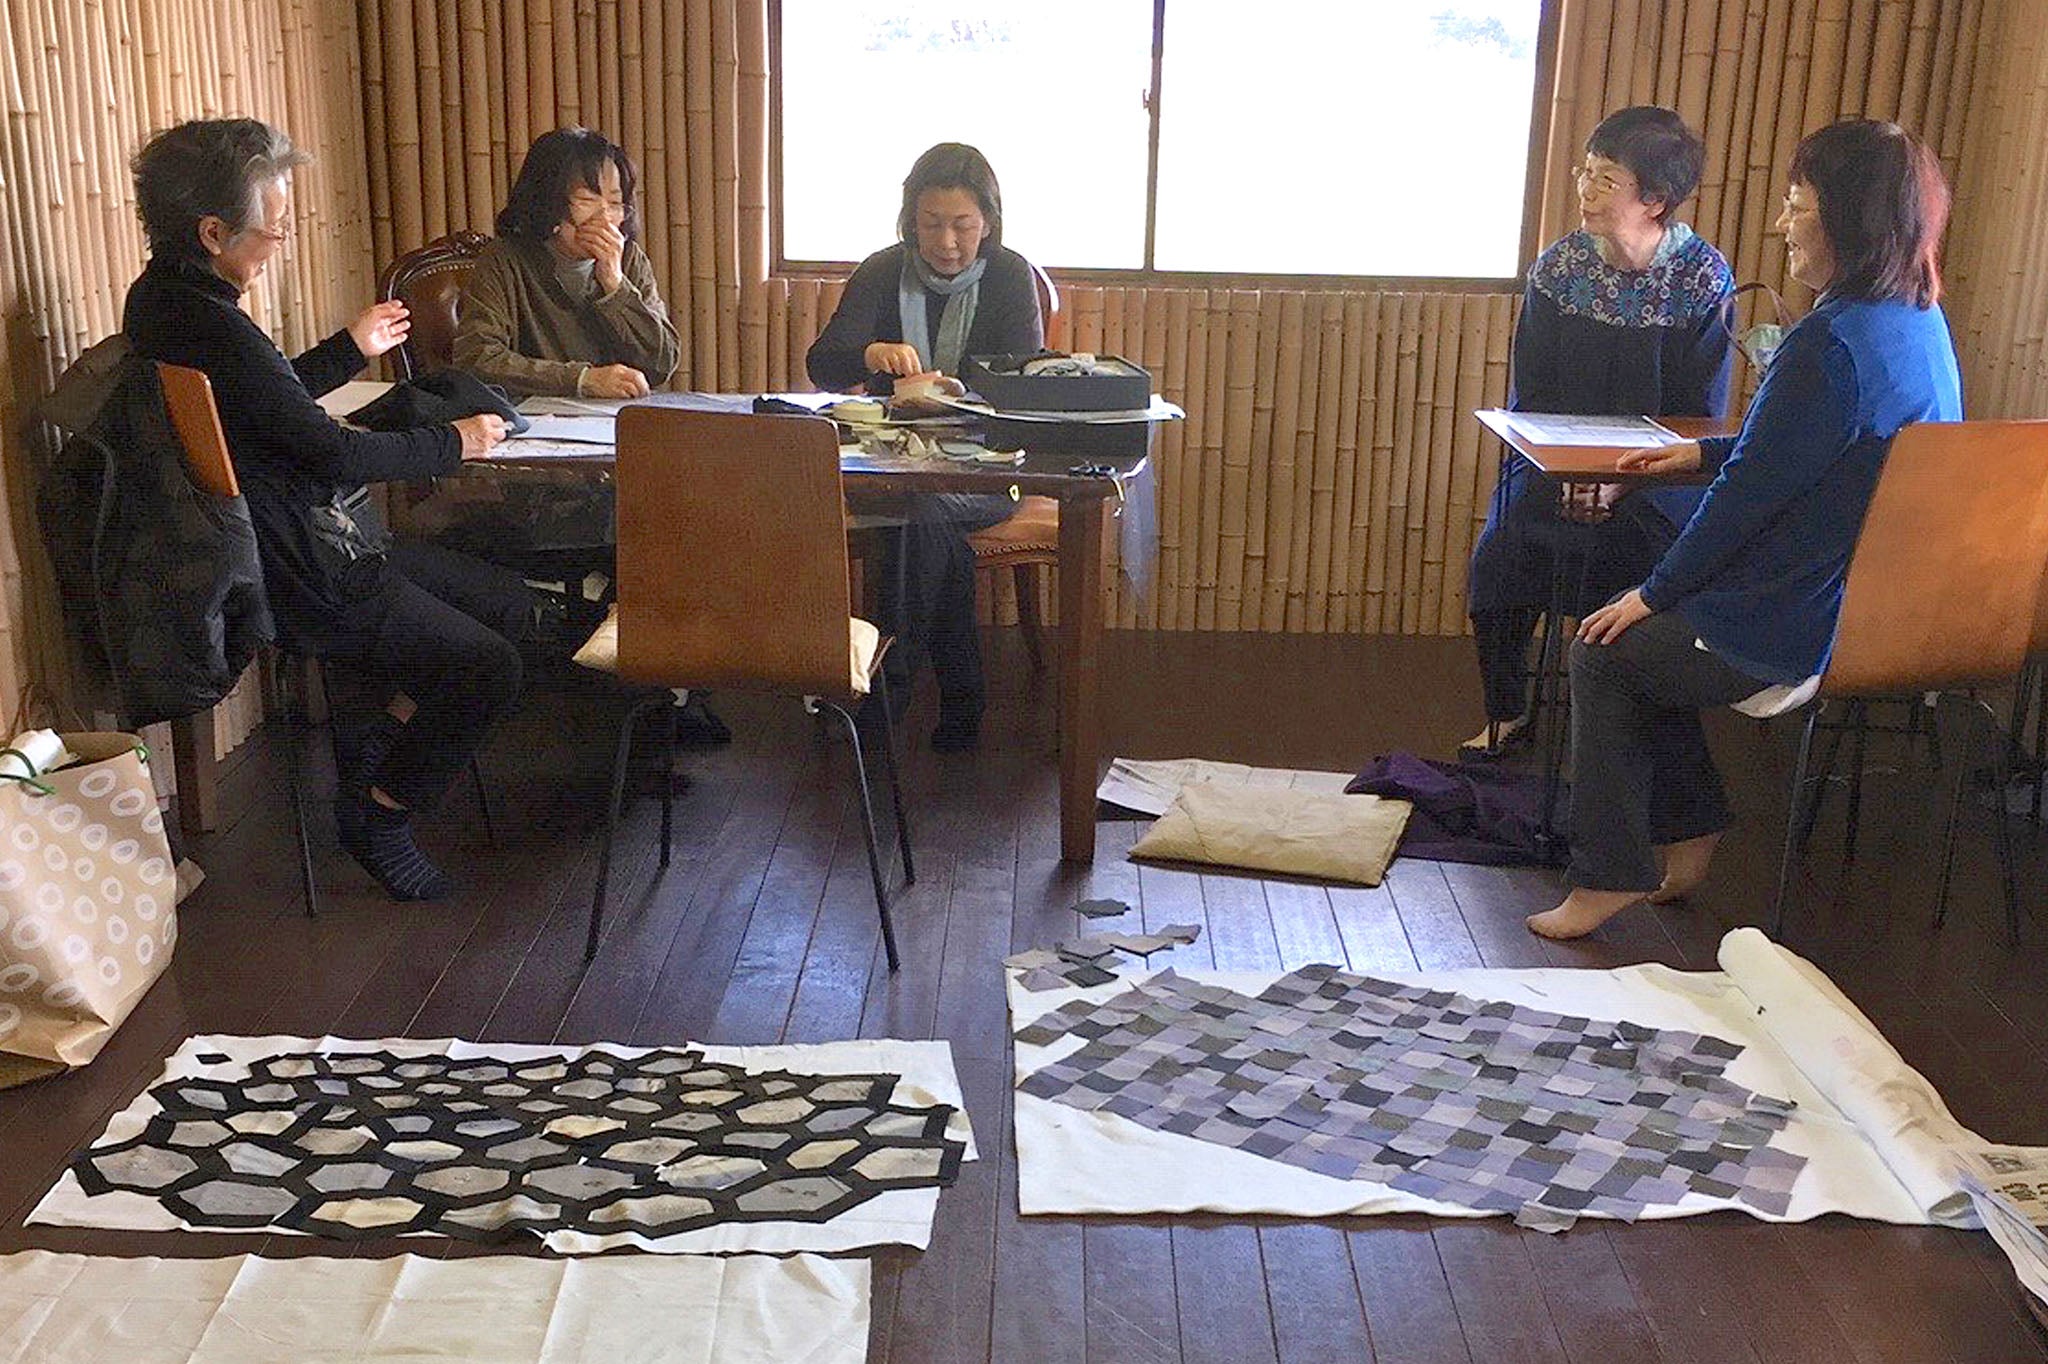 Quilters working on the Oyama Pilgrimage Quilt